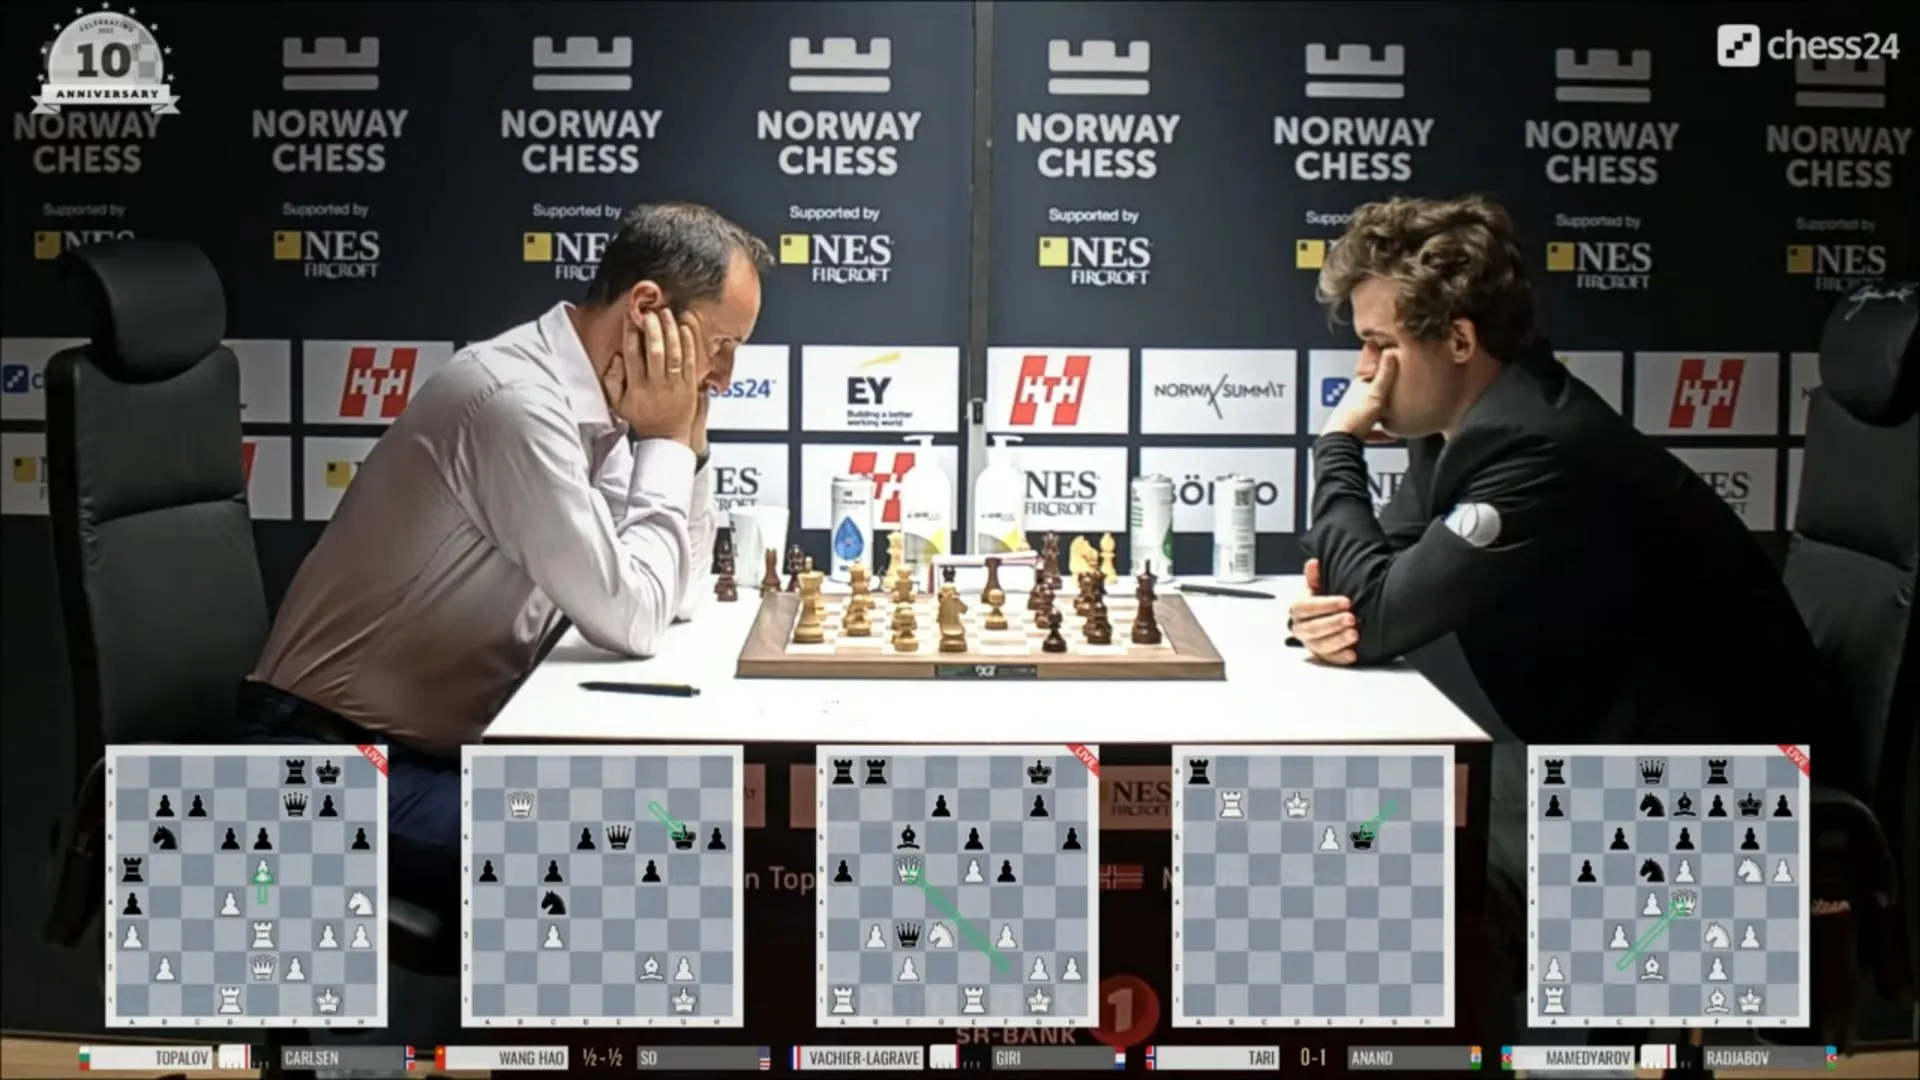 chess24 - Magnus Carlsen wins his 1st game of the 2022